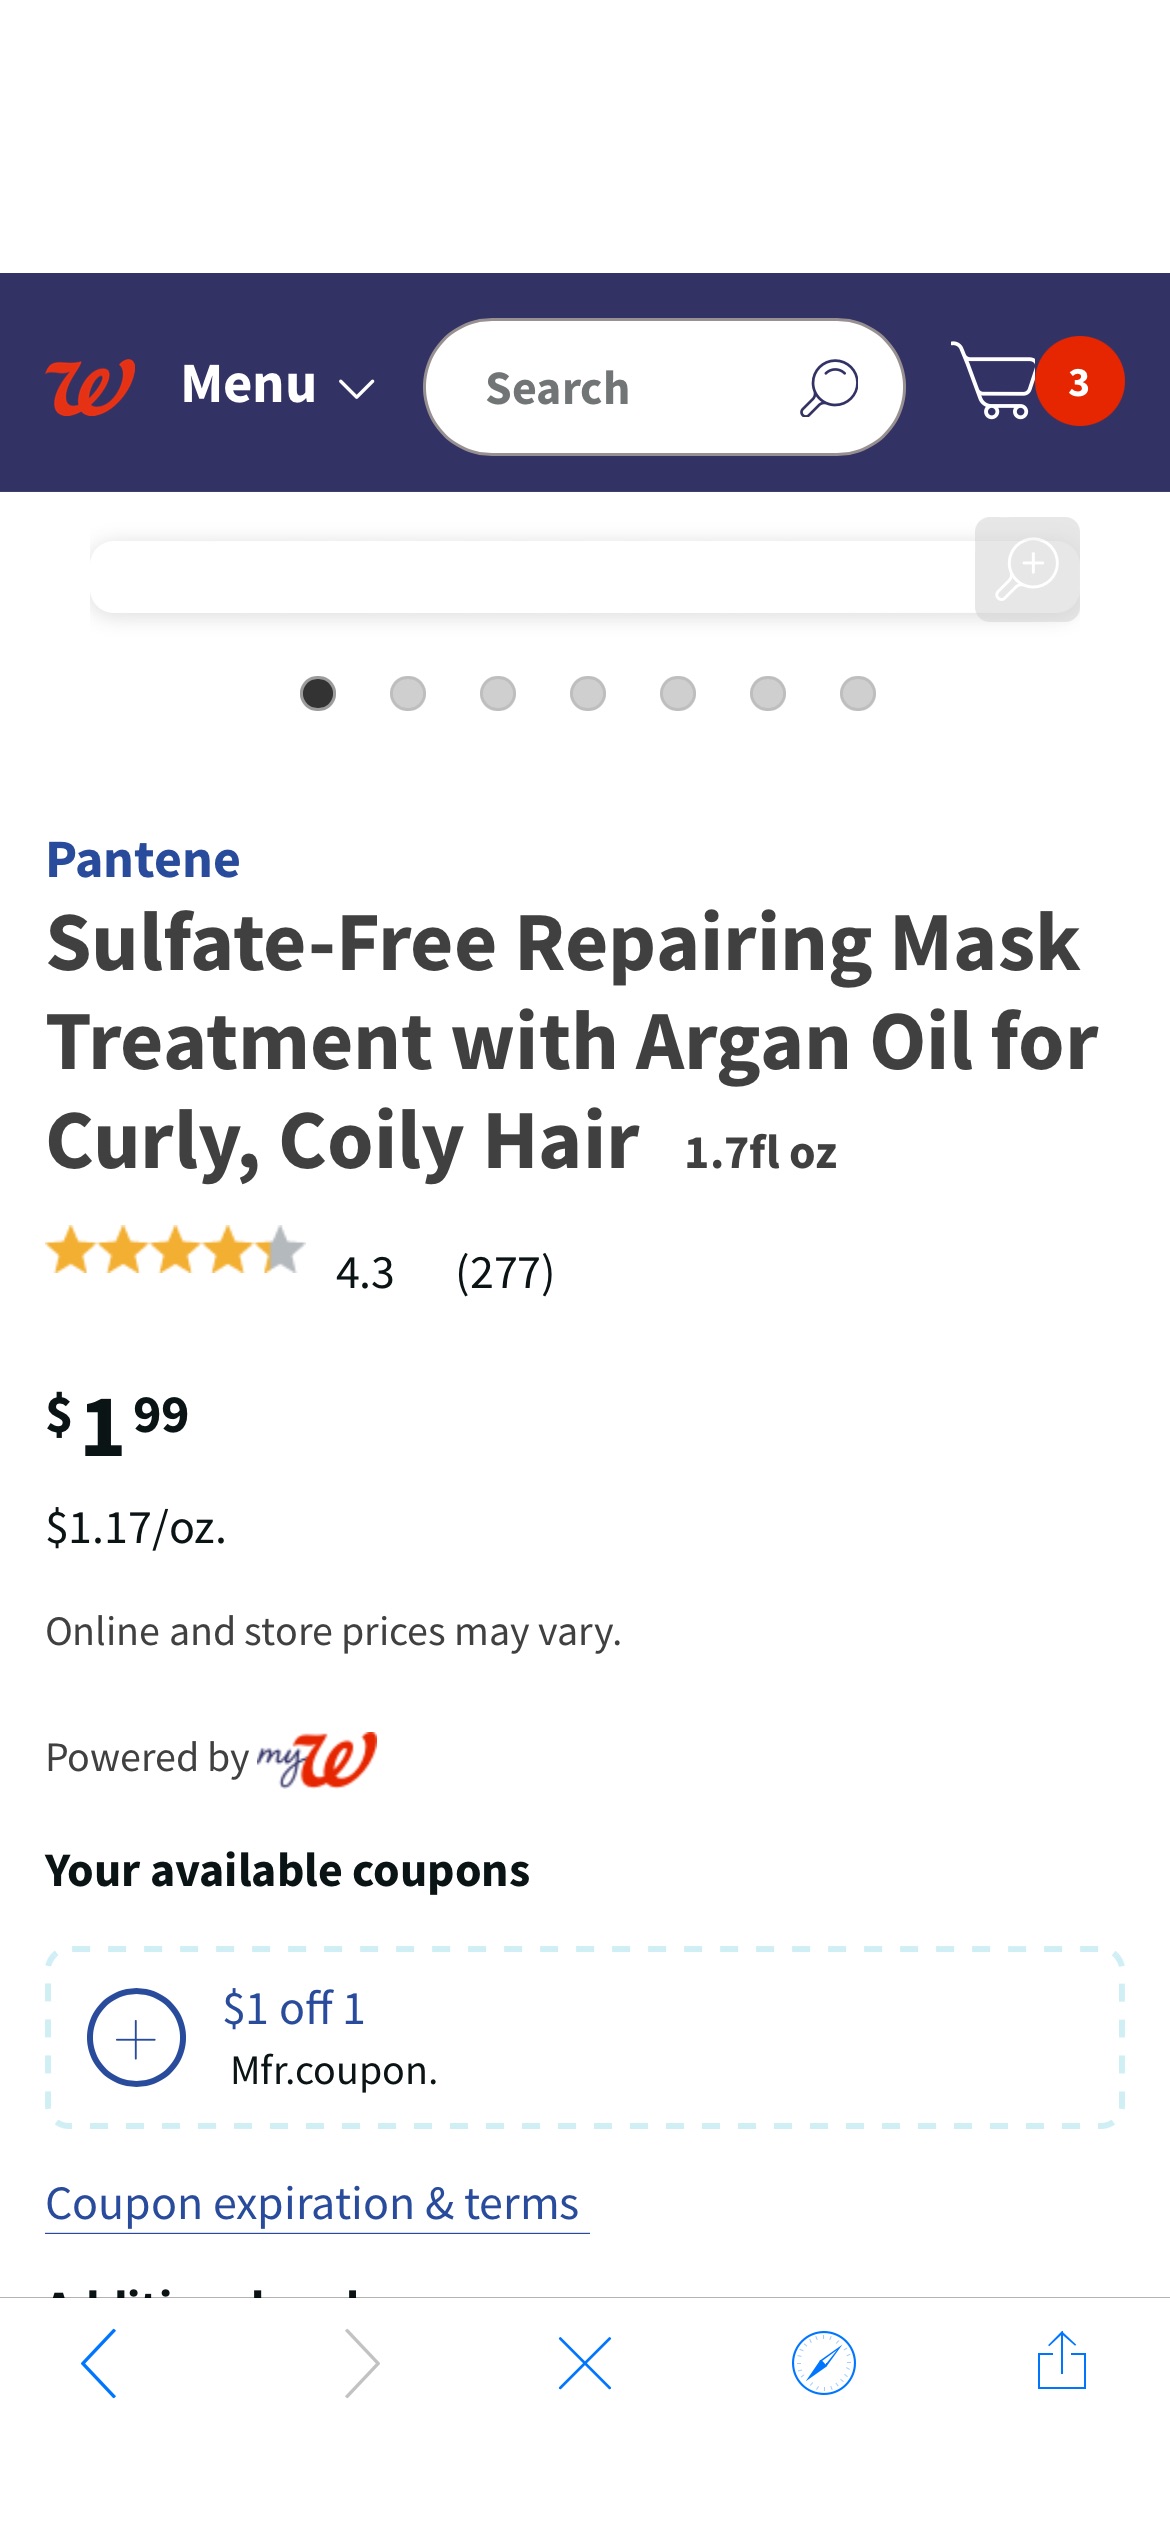 Pantene Sulfate-Free Repairing Mask Treatment with Argan Oil for Curly, Coily Hair | Walgreens